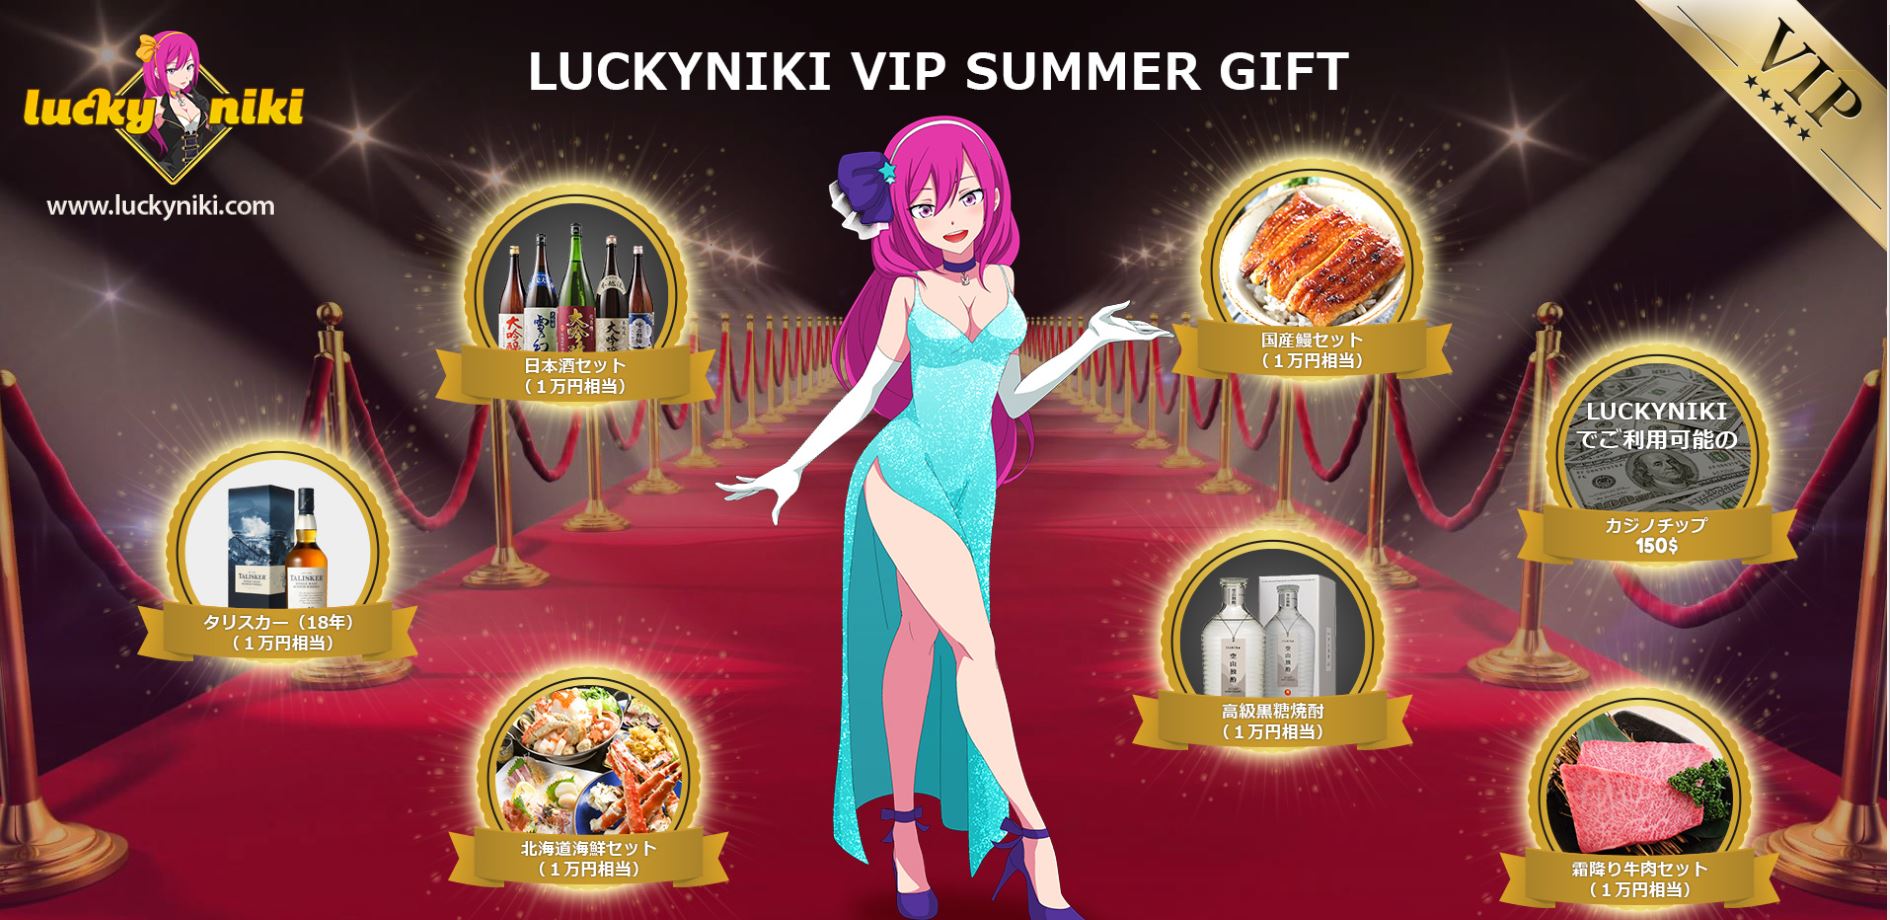 Featured image for “LuckyNikiのVIP様へサマーギフト！”